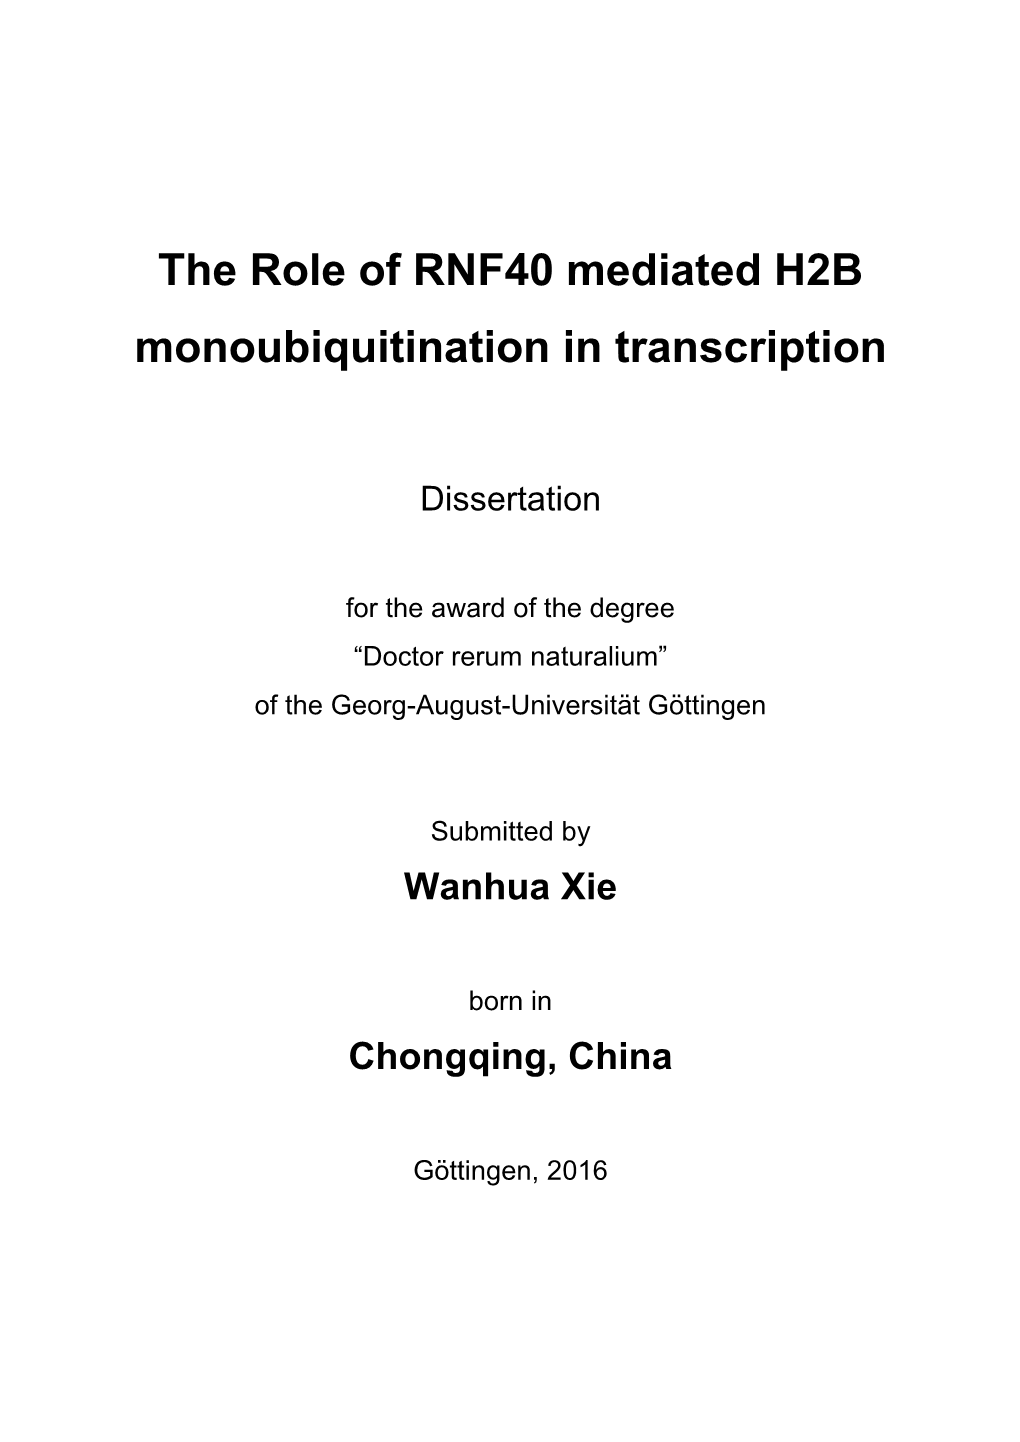 The Role of RNF40 Mediated H2B Monoubiquitination in Transcription